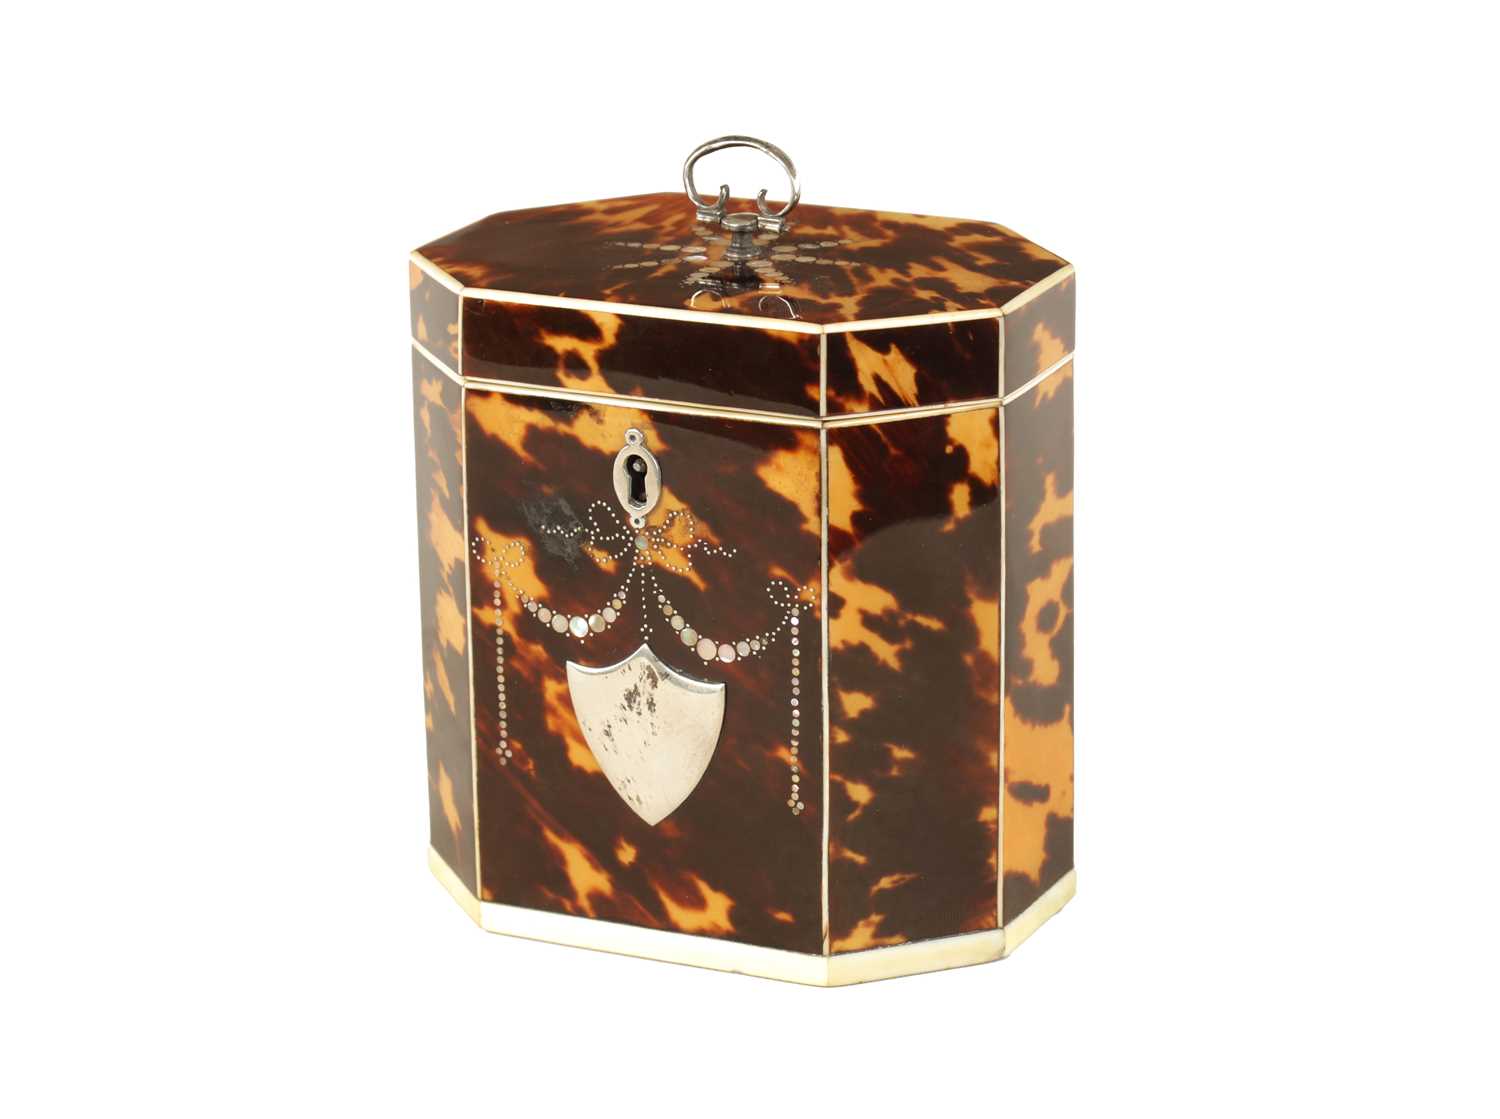 A FINE GEORGE III TORTOISHELL, IVORY AND MOTHER OF PEARL INLAID FACETTED TEA CADDY